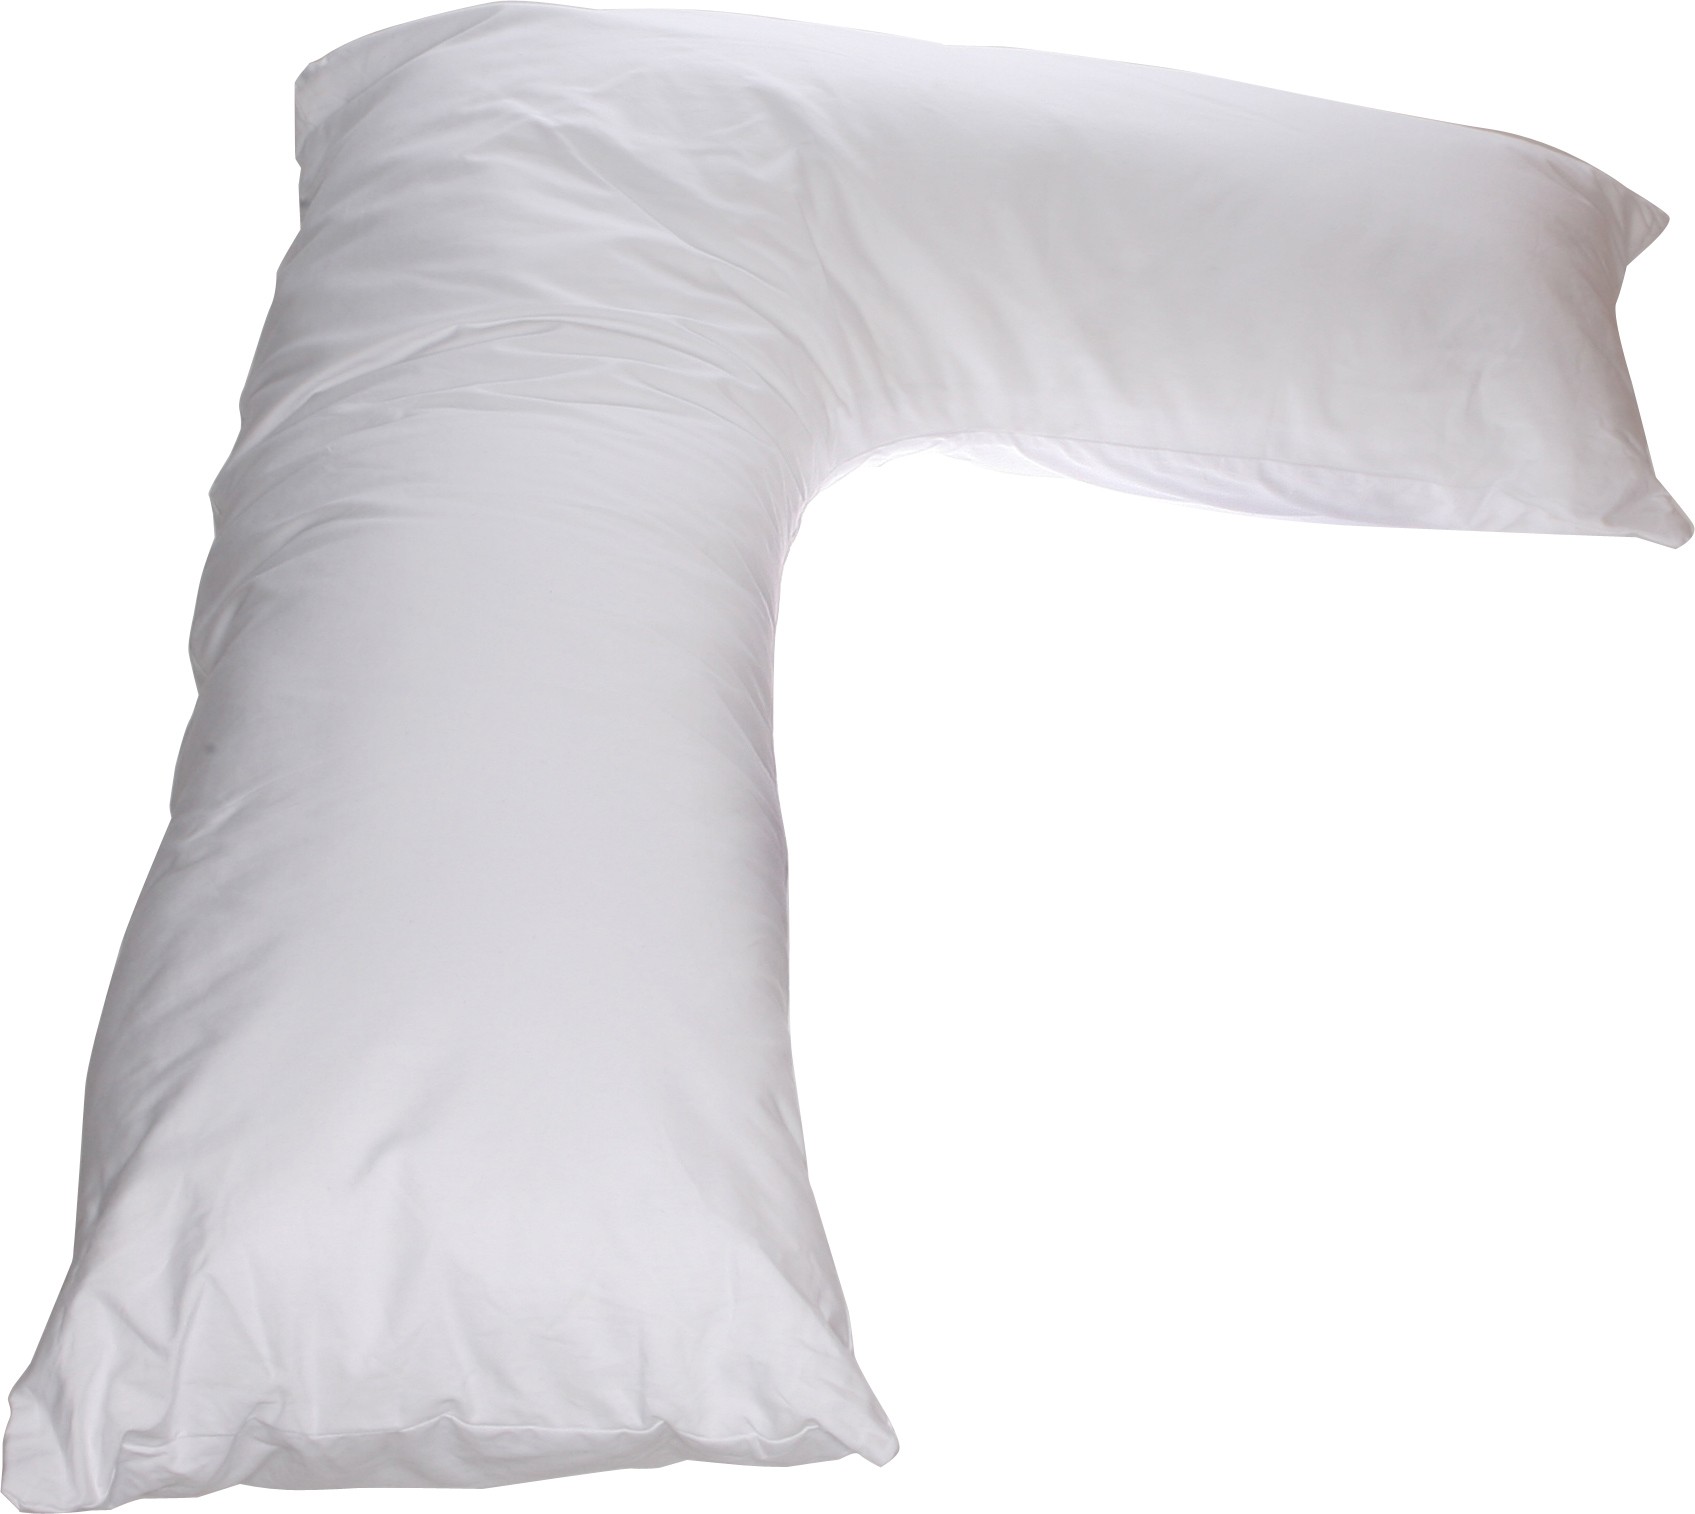 L Side Sleeper Pillow White Long L Body Pillows For Comfort And Pregnant Women 